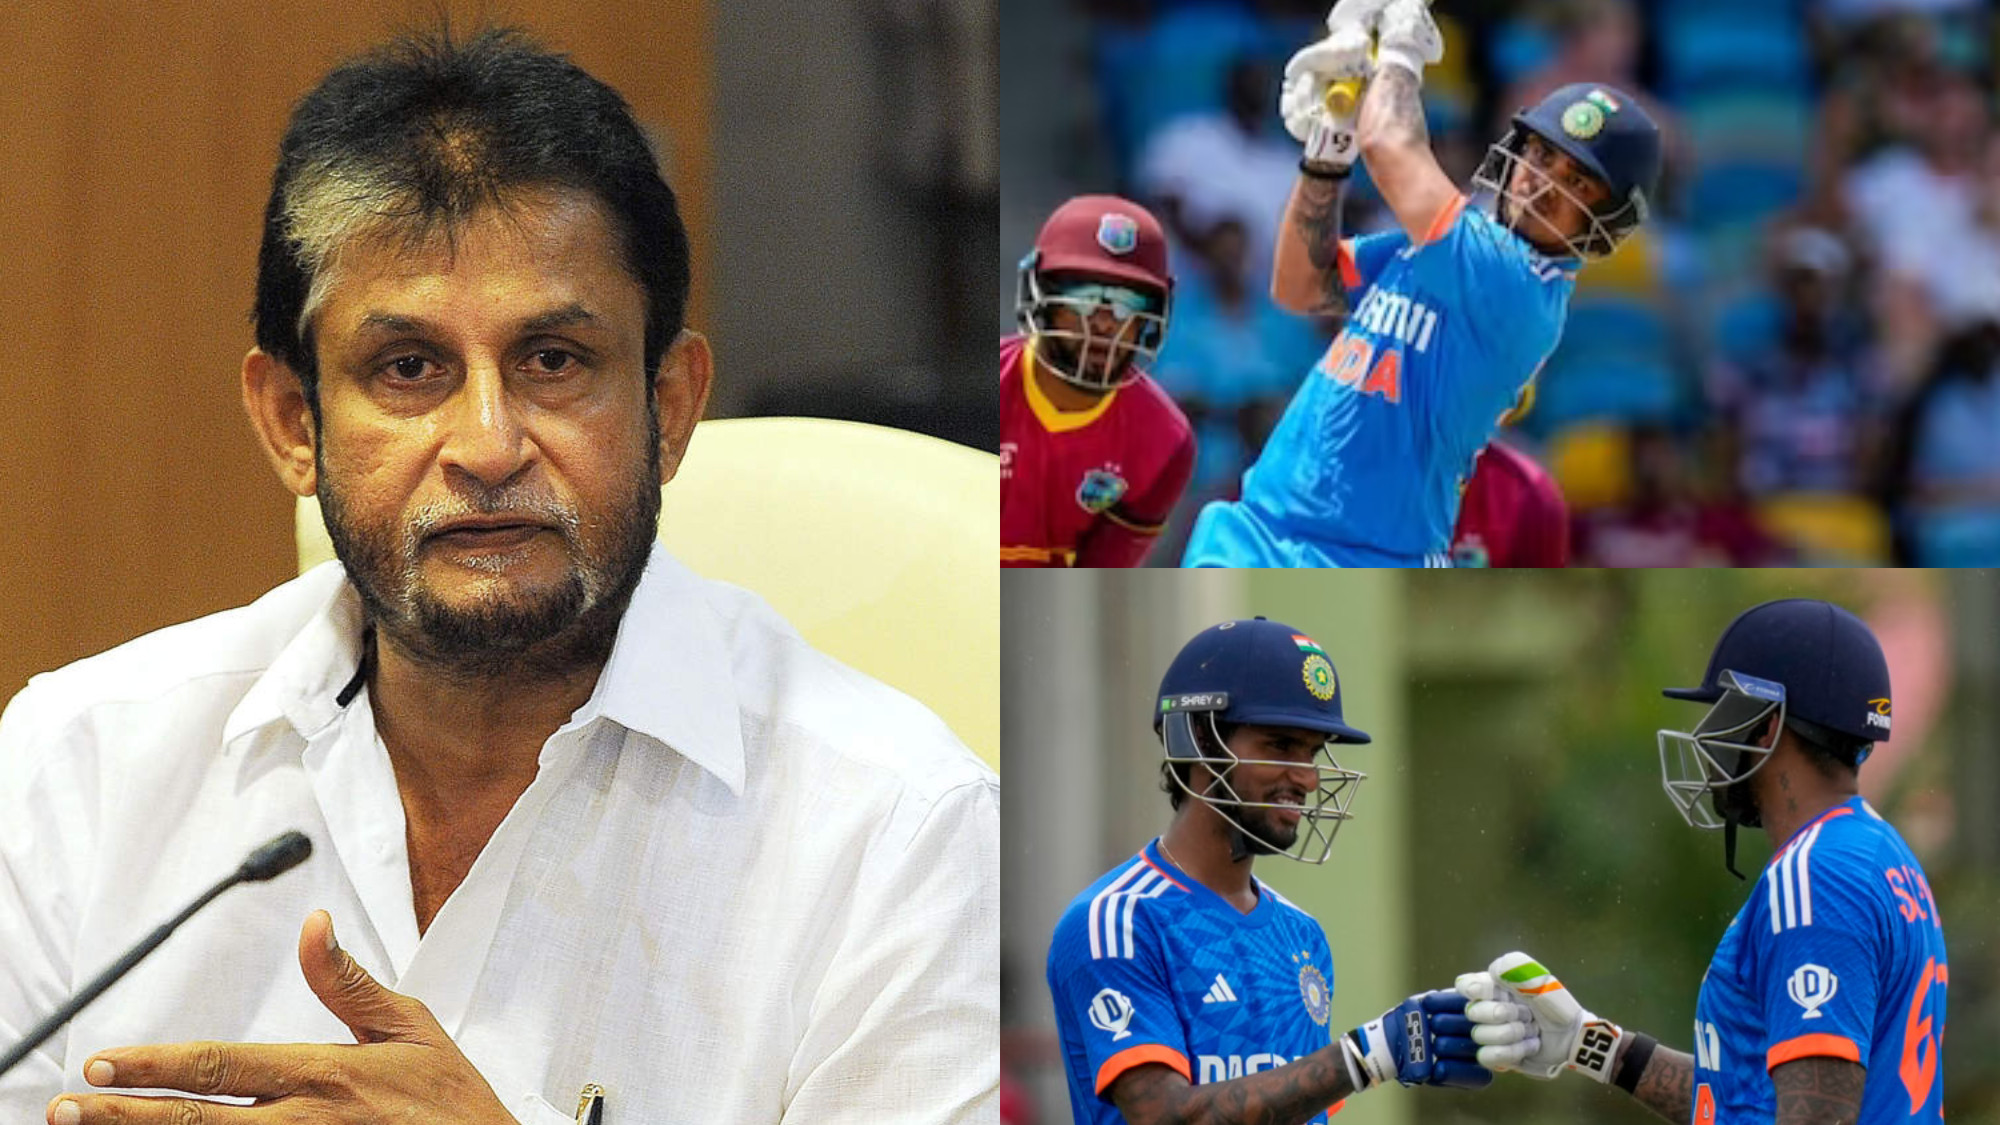 CWC 2023: ‘No need for backup keeper’- Sandeep Patil says playing Kishan alone allows both Surya and Tilak in India XI